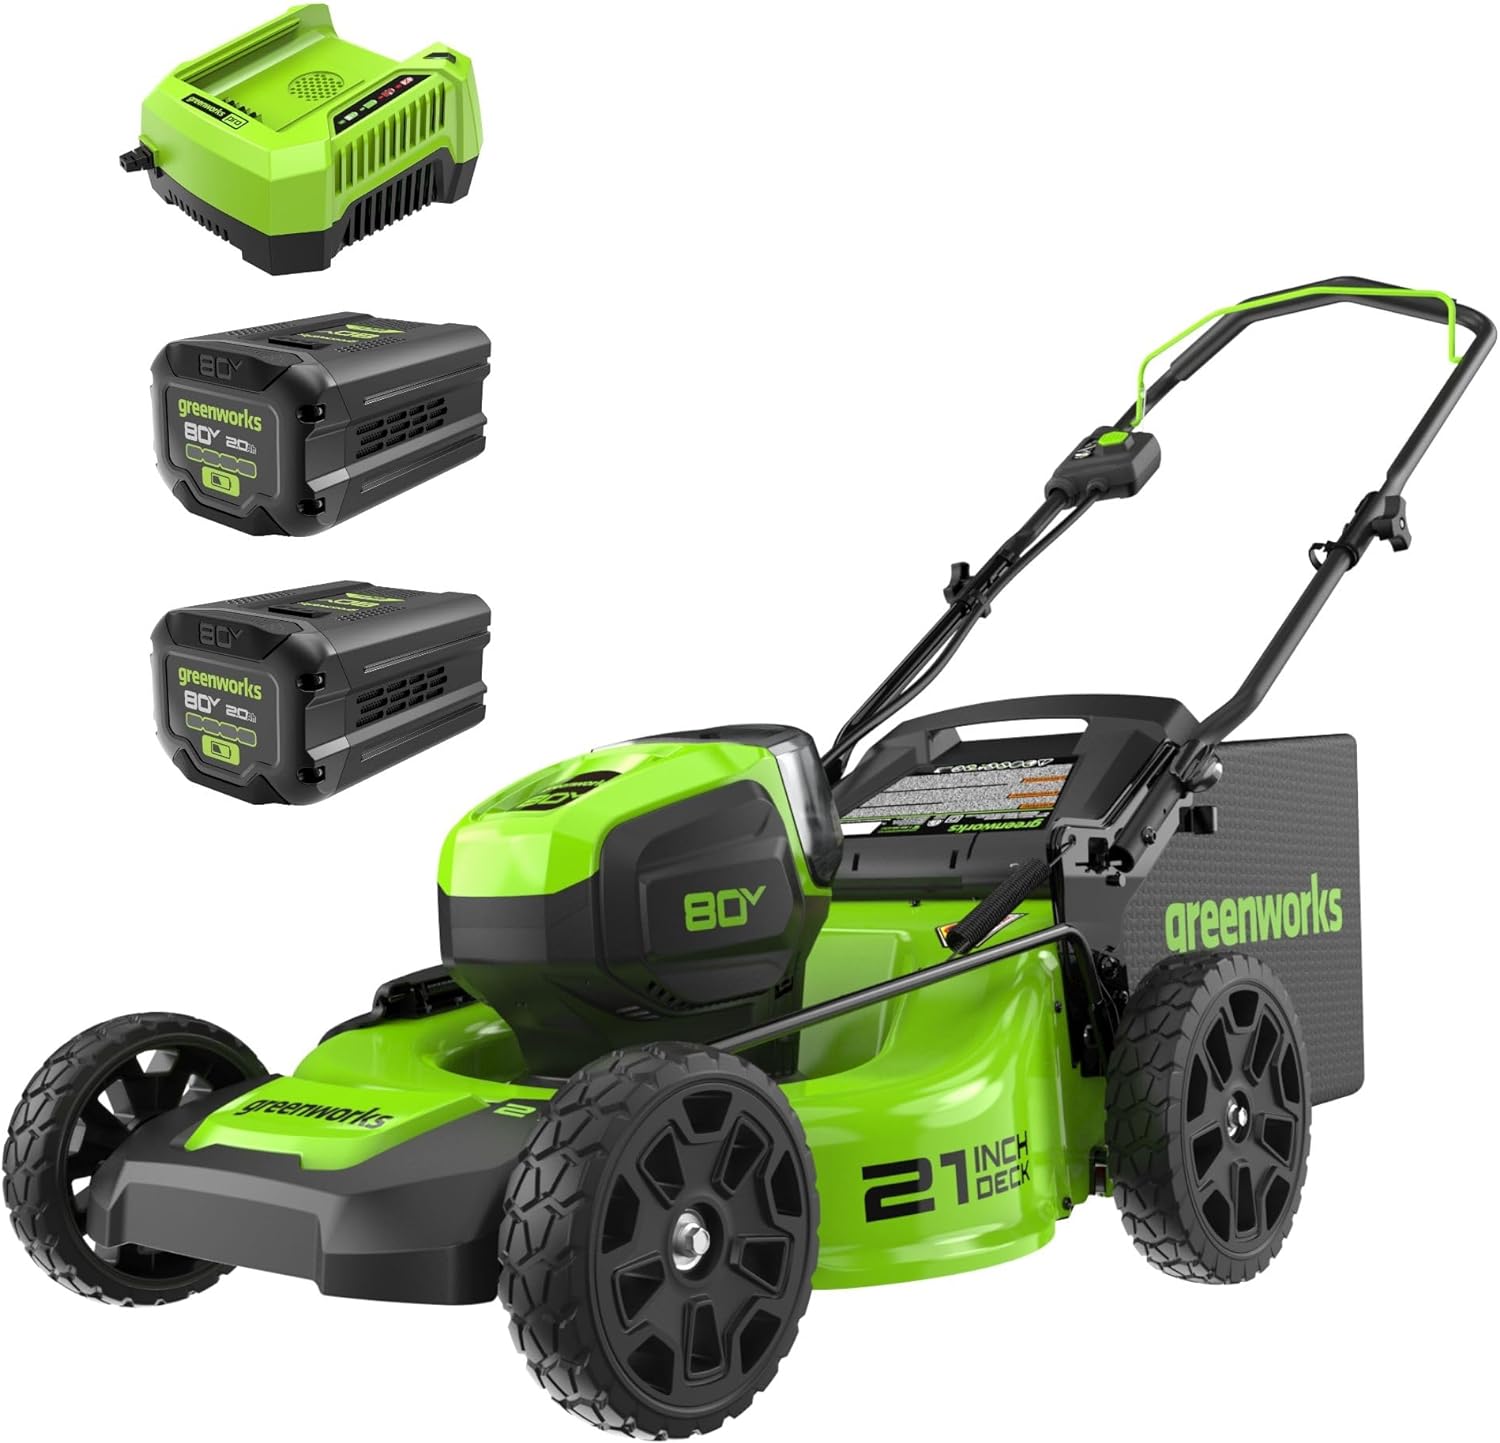 Greenworks 80V 21" Brushless Cordless (Push) Lawn Mower (75+ Compatible Tools), (2) 2.0Ah Batteries and 30 Minute Rapid Charger Included - $384.99